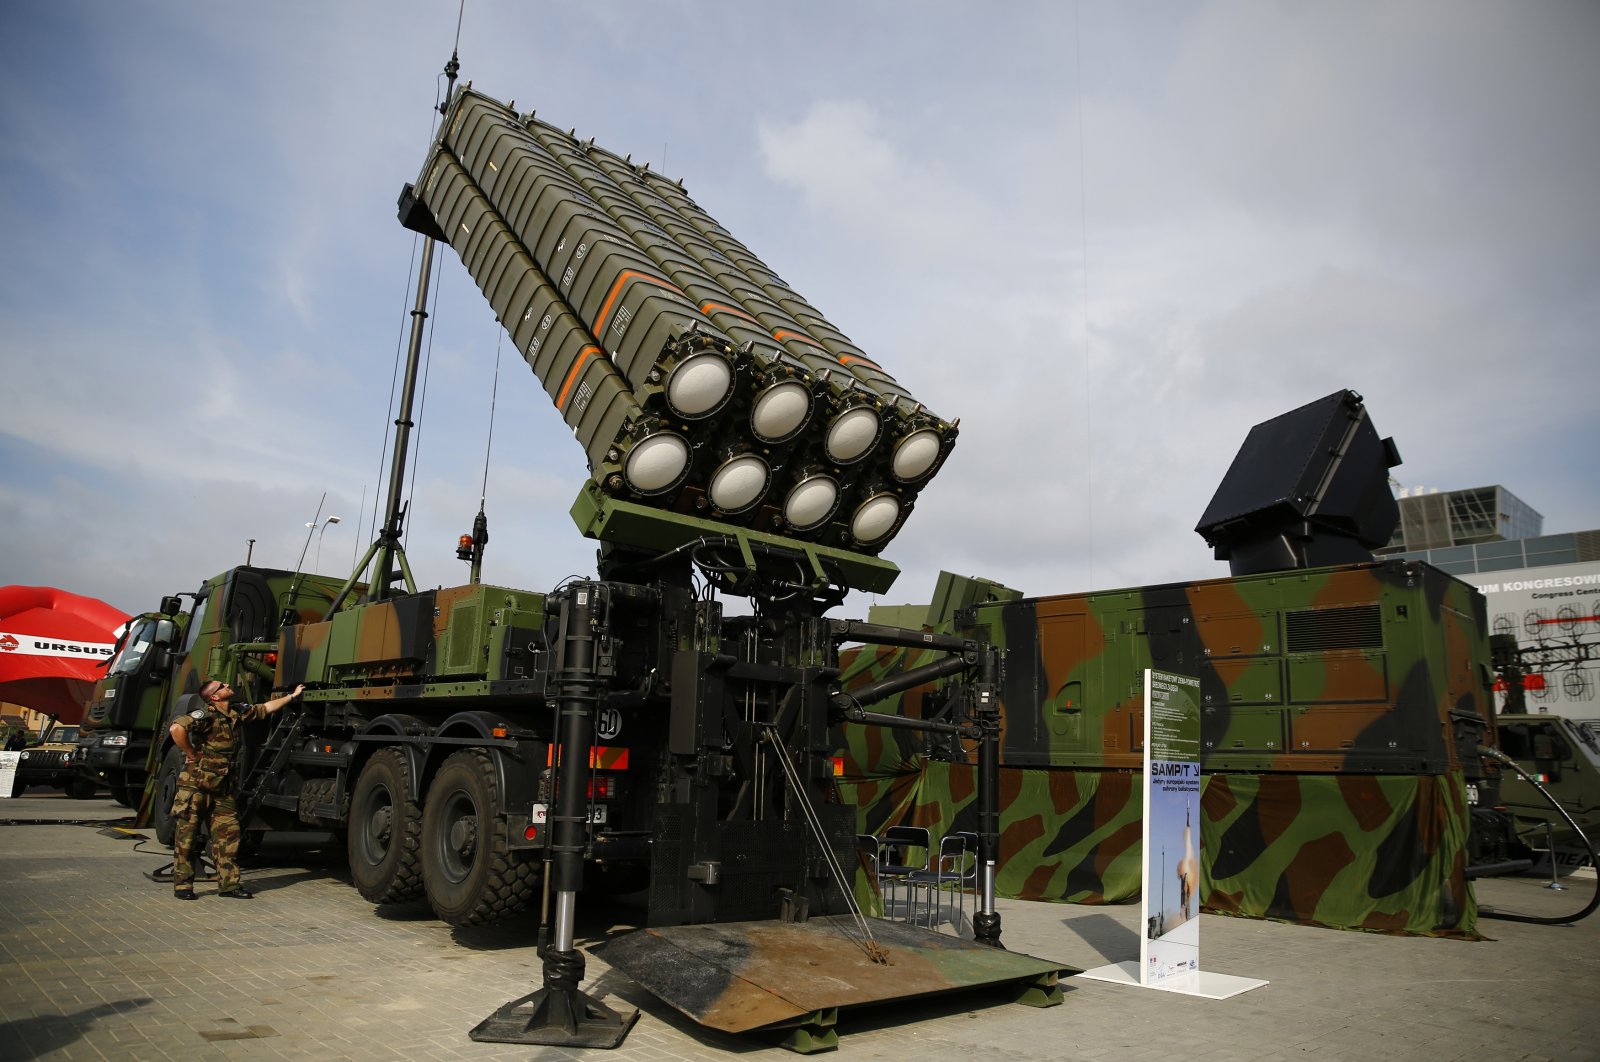 Soldiers present an anti-missile system SAMP/T by Thales at an international military fair in Kielce, southern Poland, Sept. 2, 2014. (Reuters Photo)